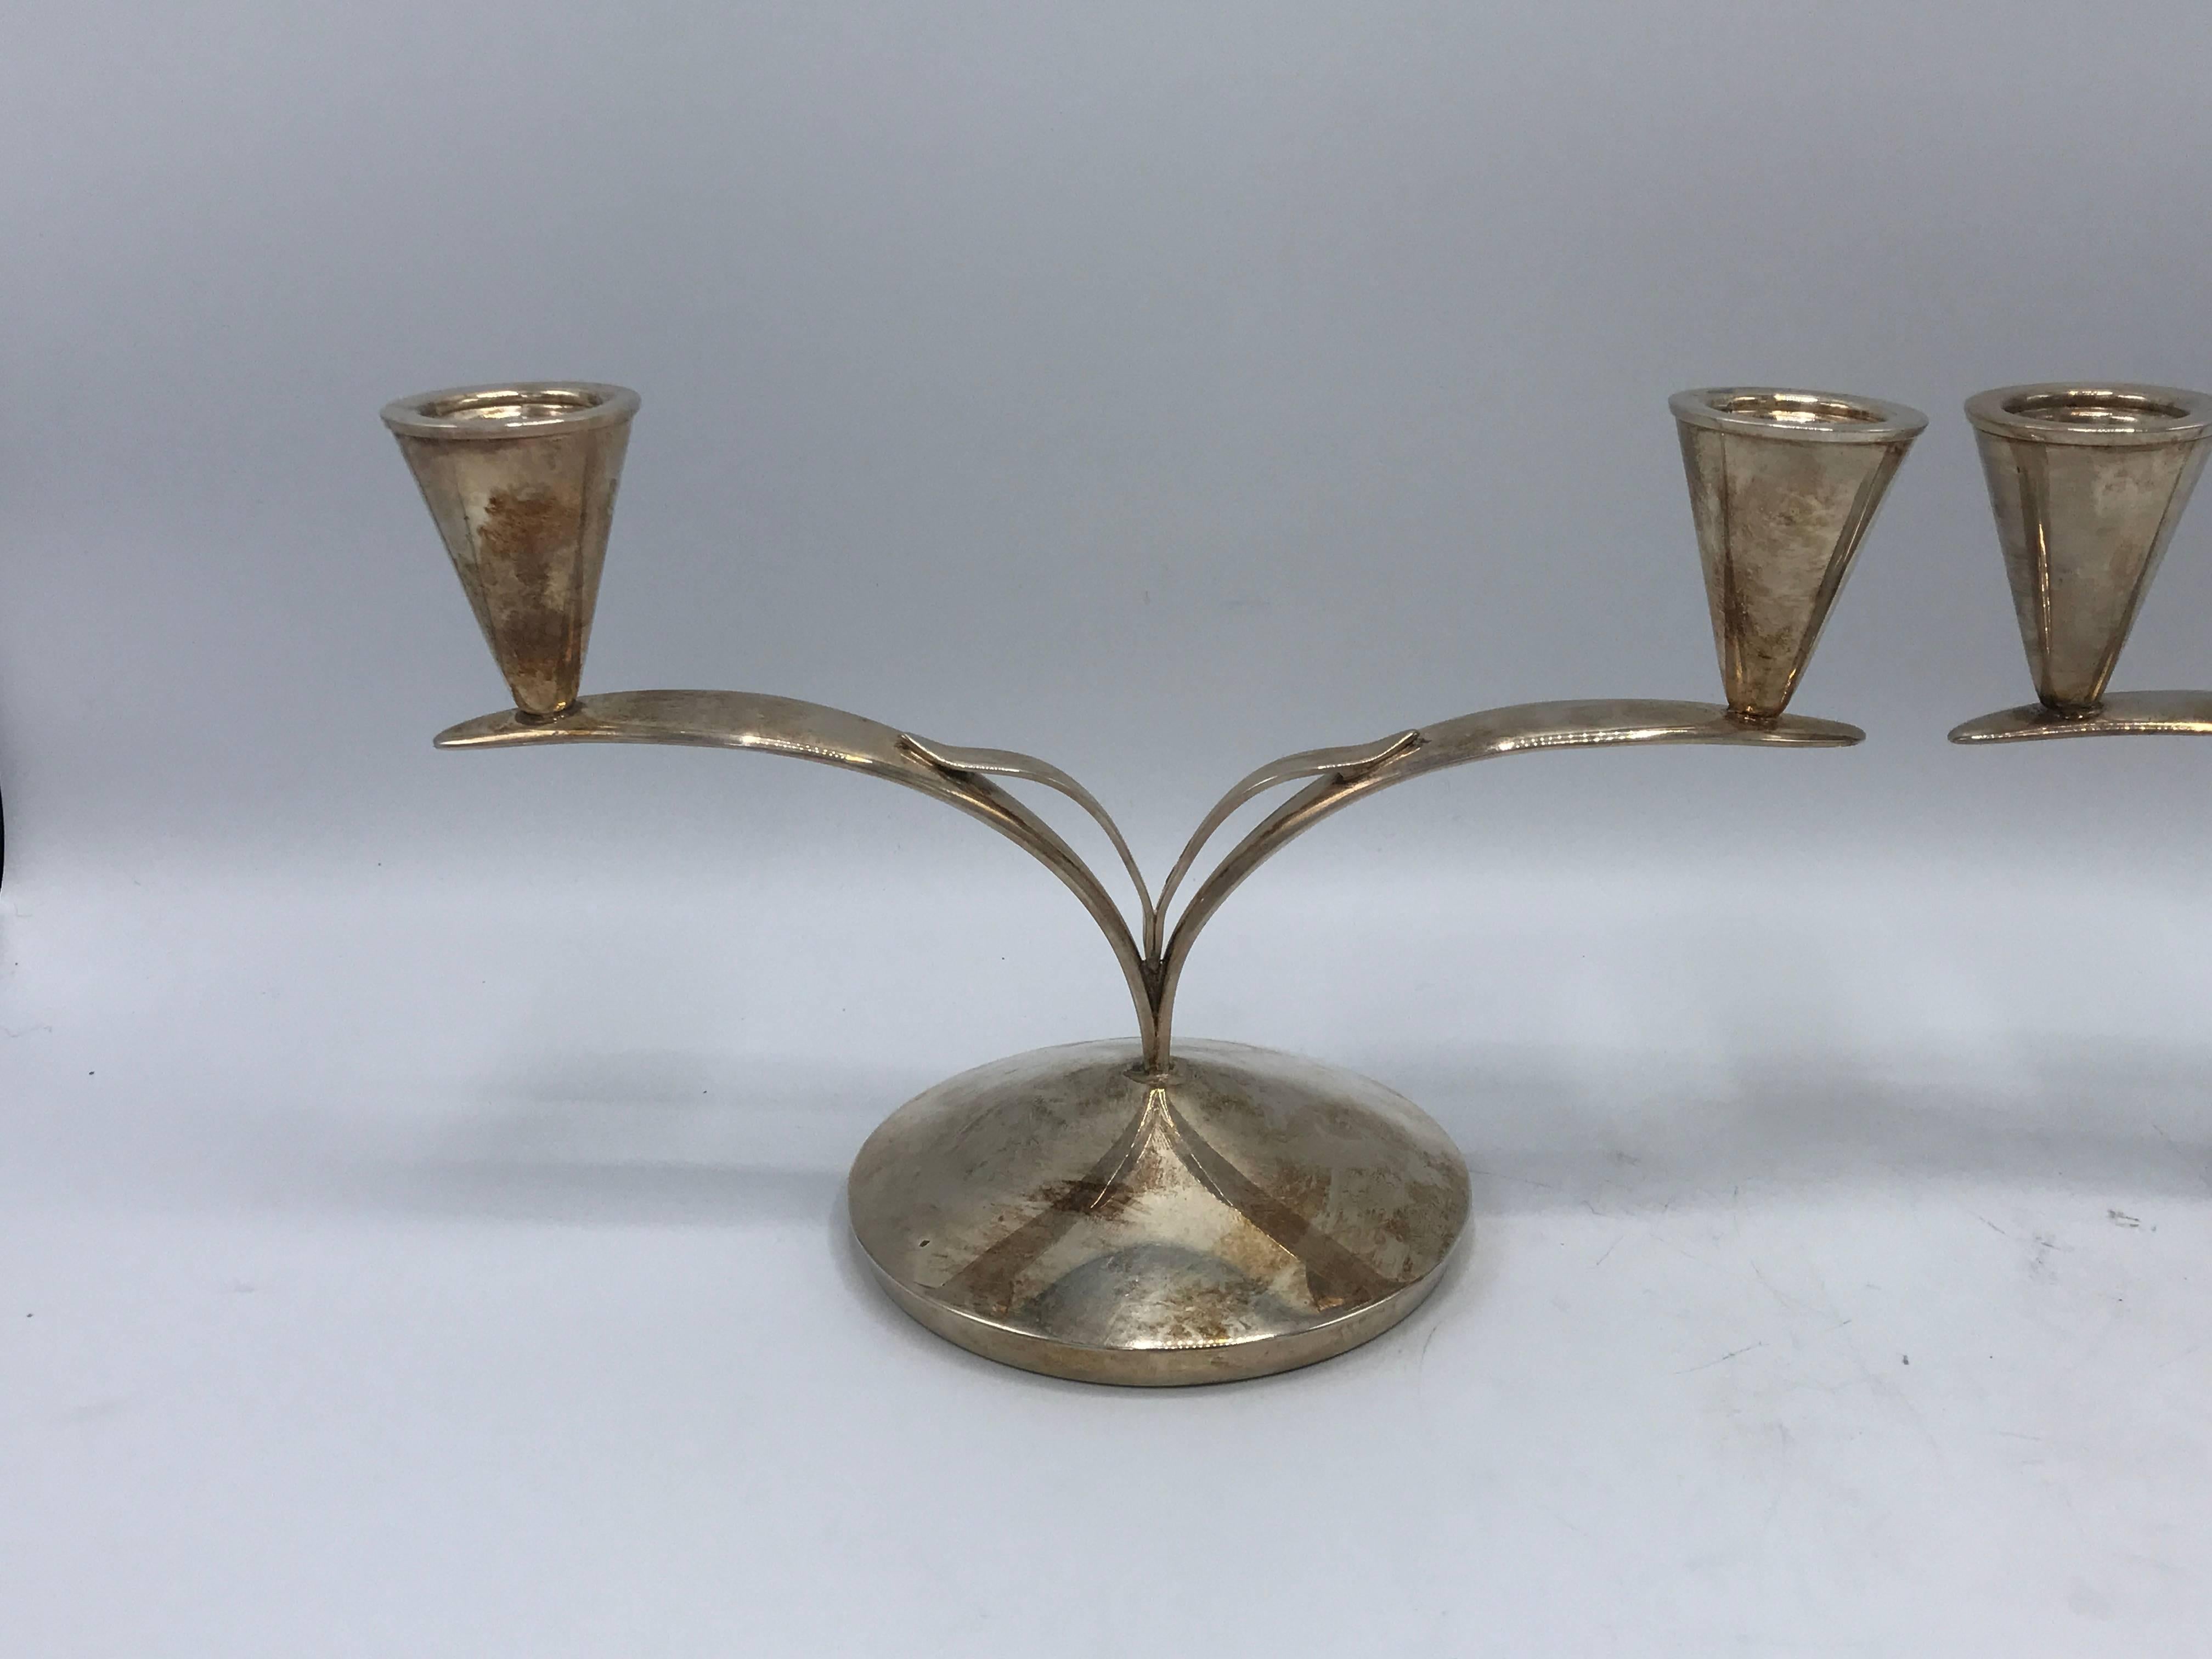 Offered is a stunning pair of 1960s Mid-Century Modern Danish silver plated candlestick holders. Marked: Denmark.